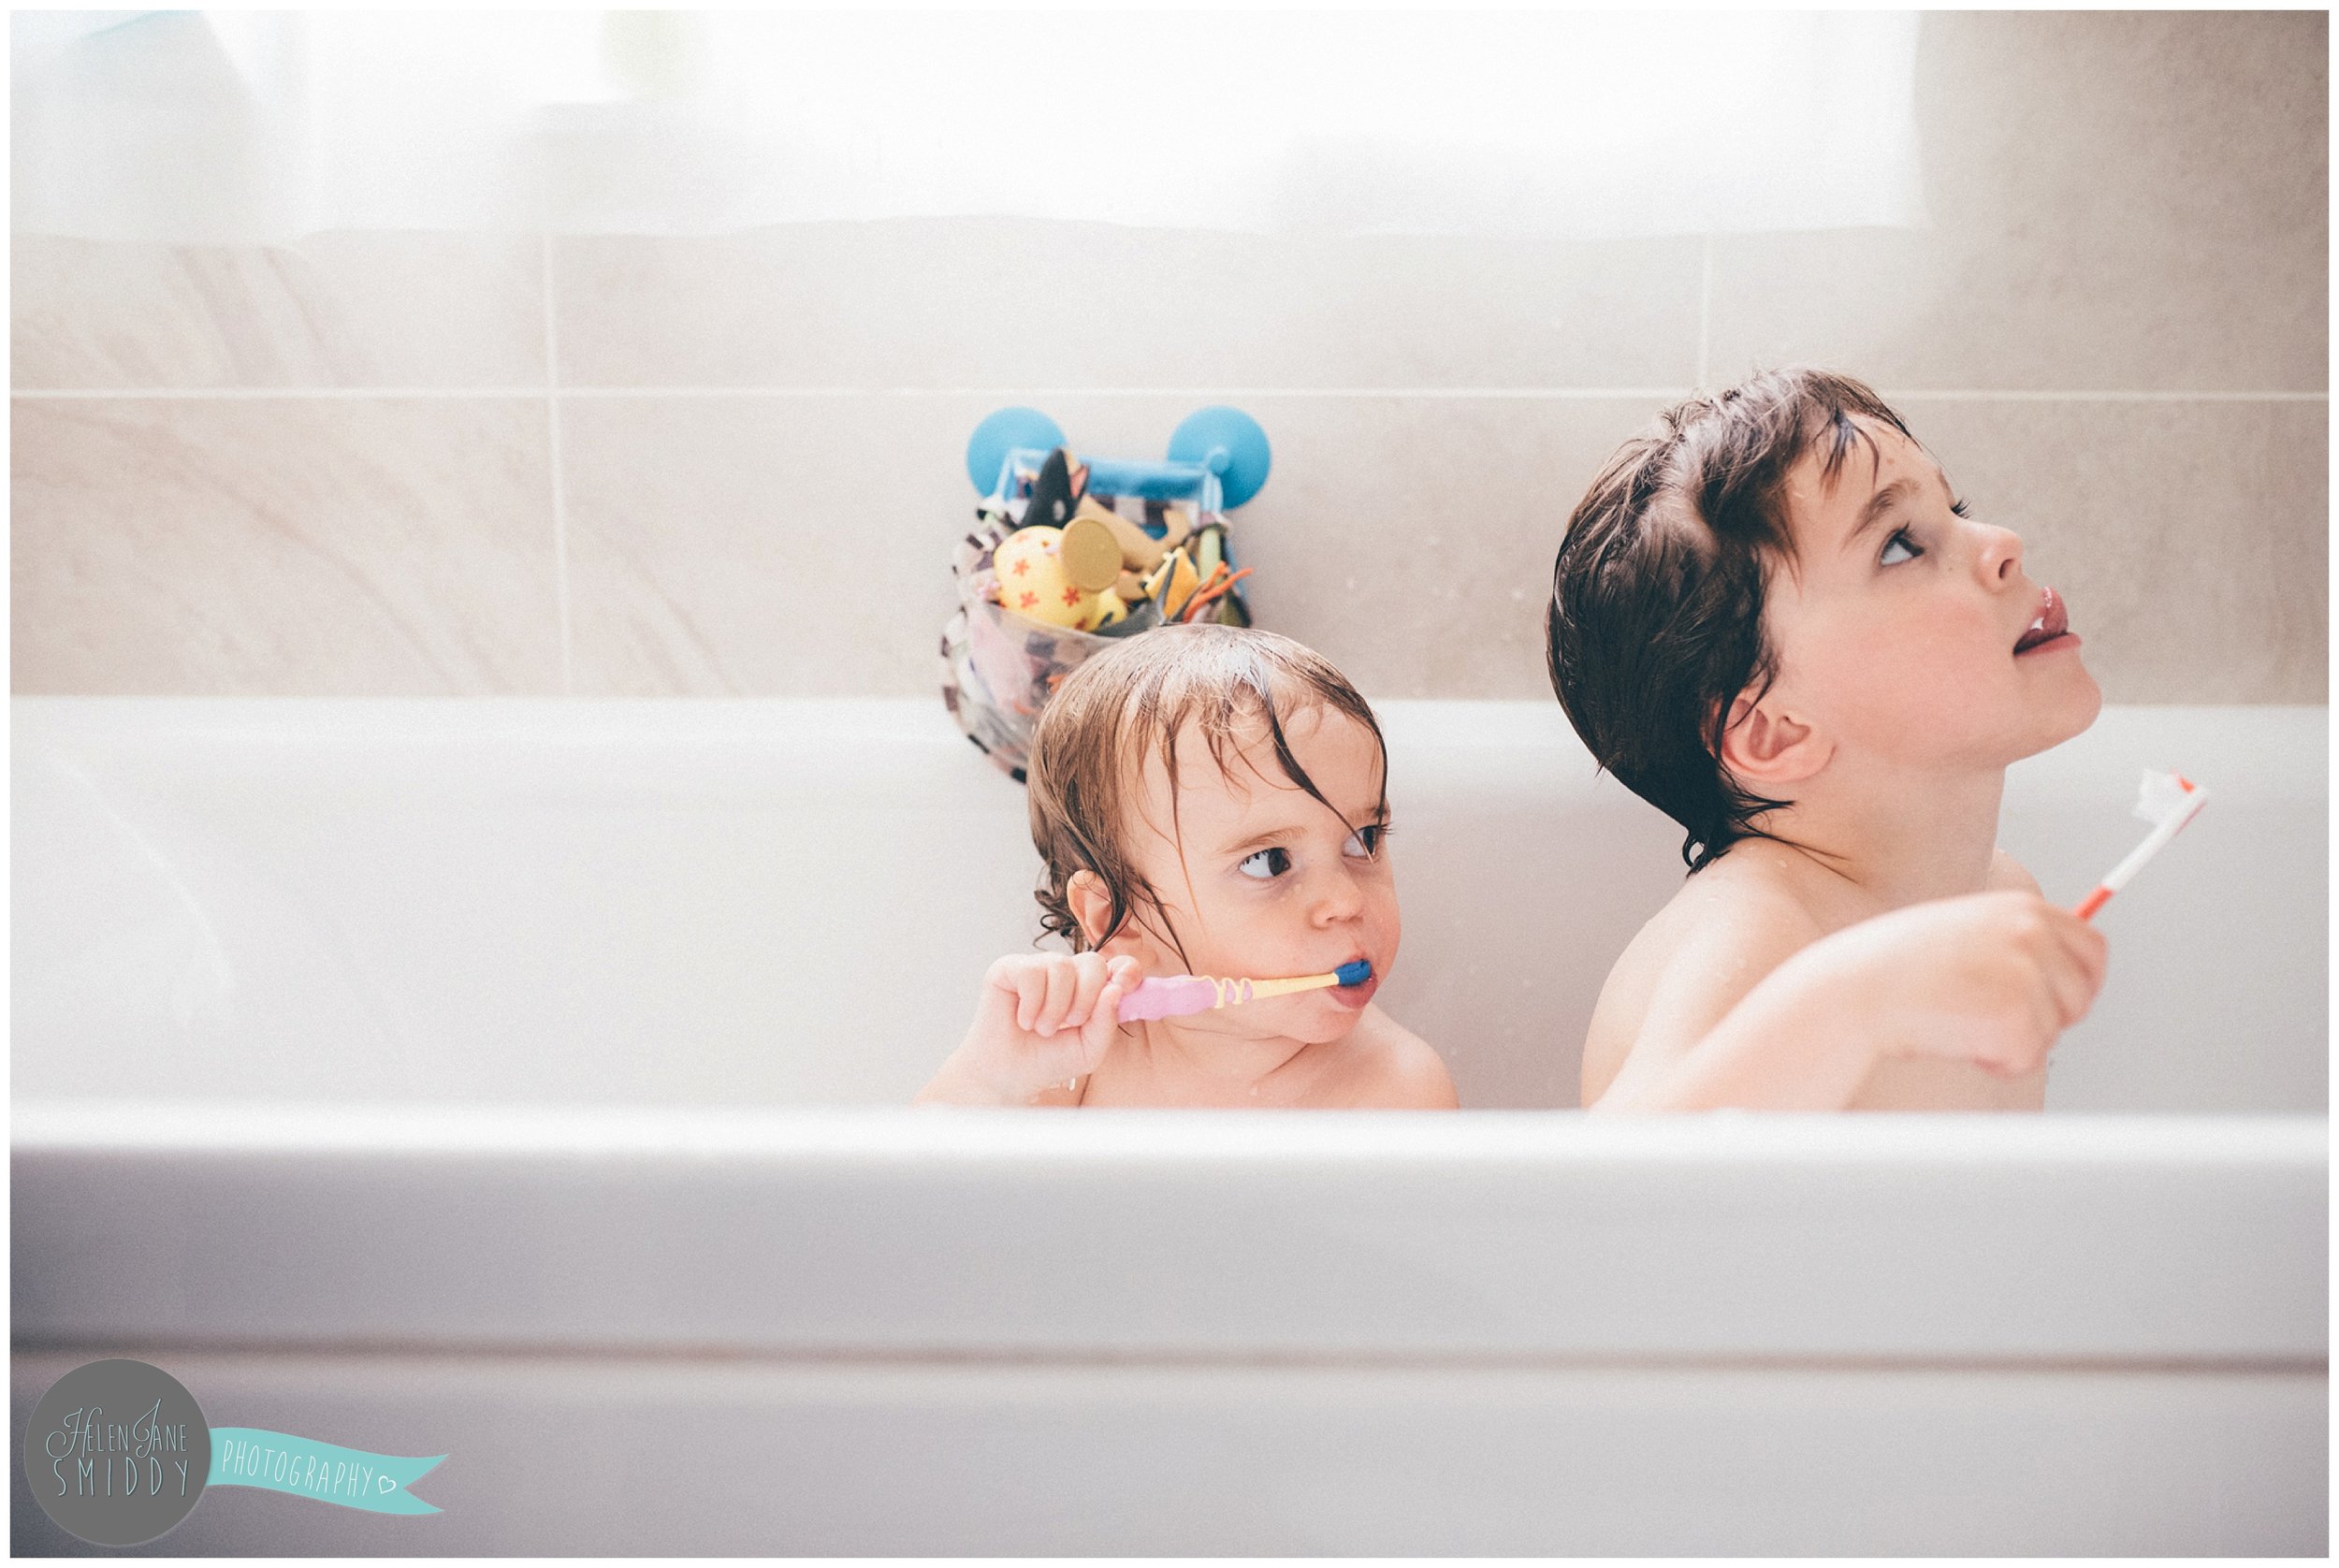 Bathtime in the Frodsham family home during an A Day In The Life photoshoot in Cheshire.